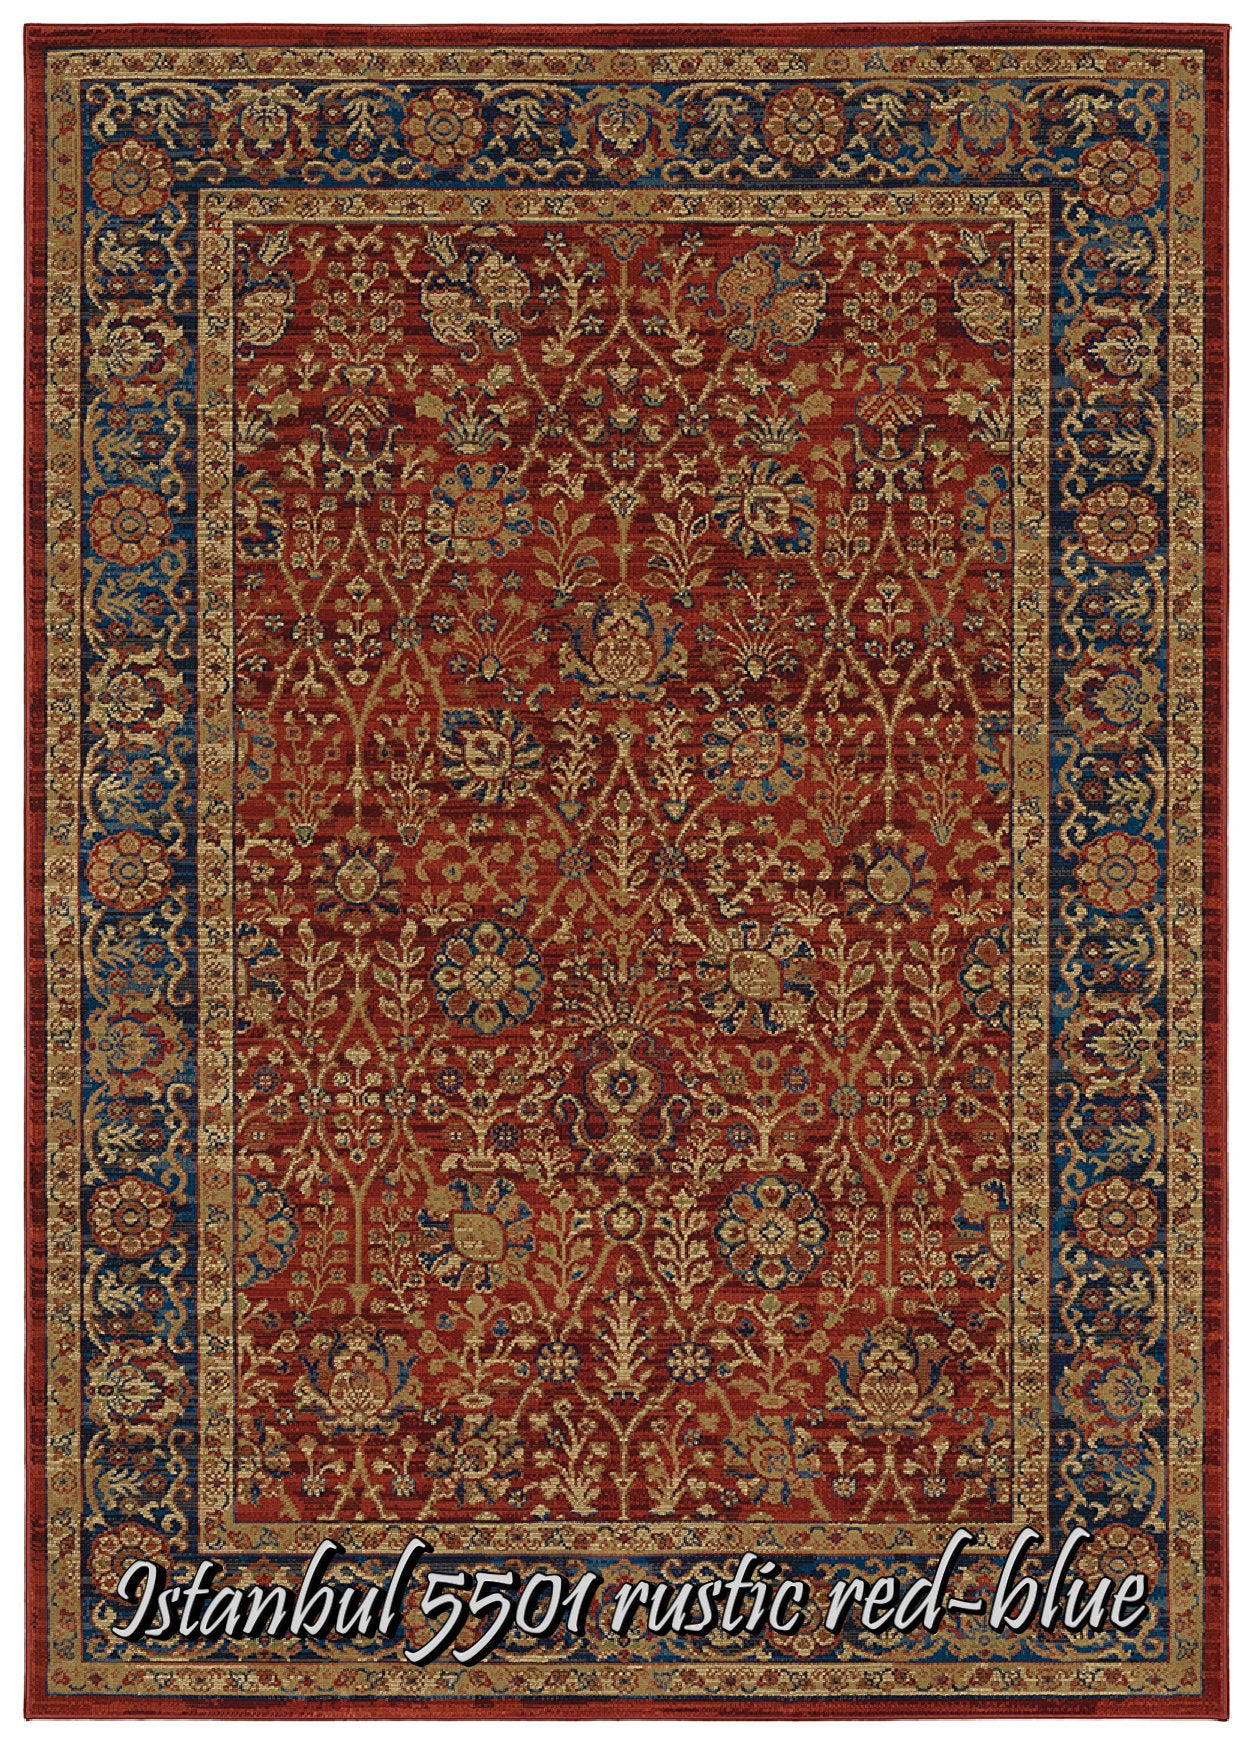 Istanbul 5501 rustic red-blue